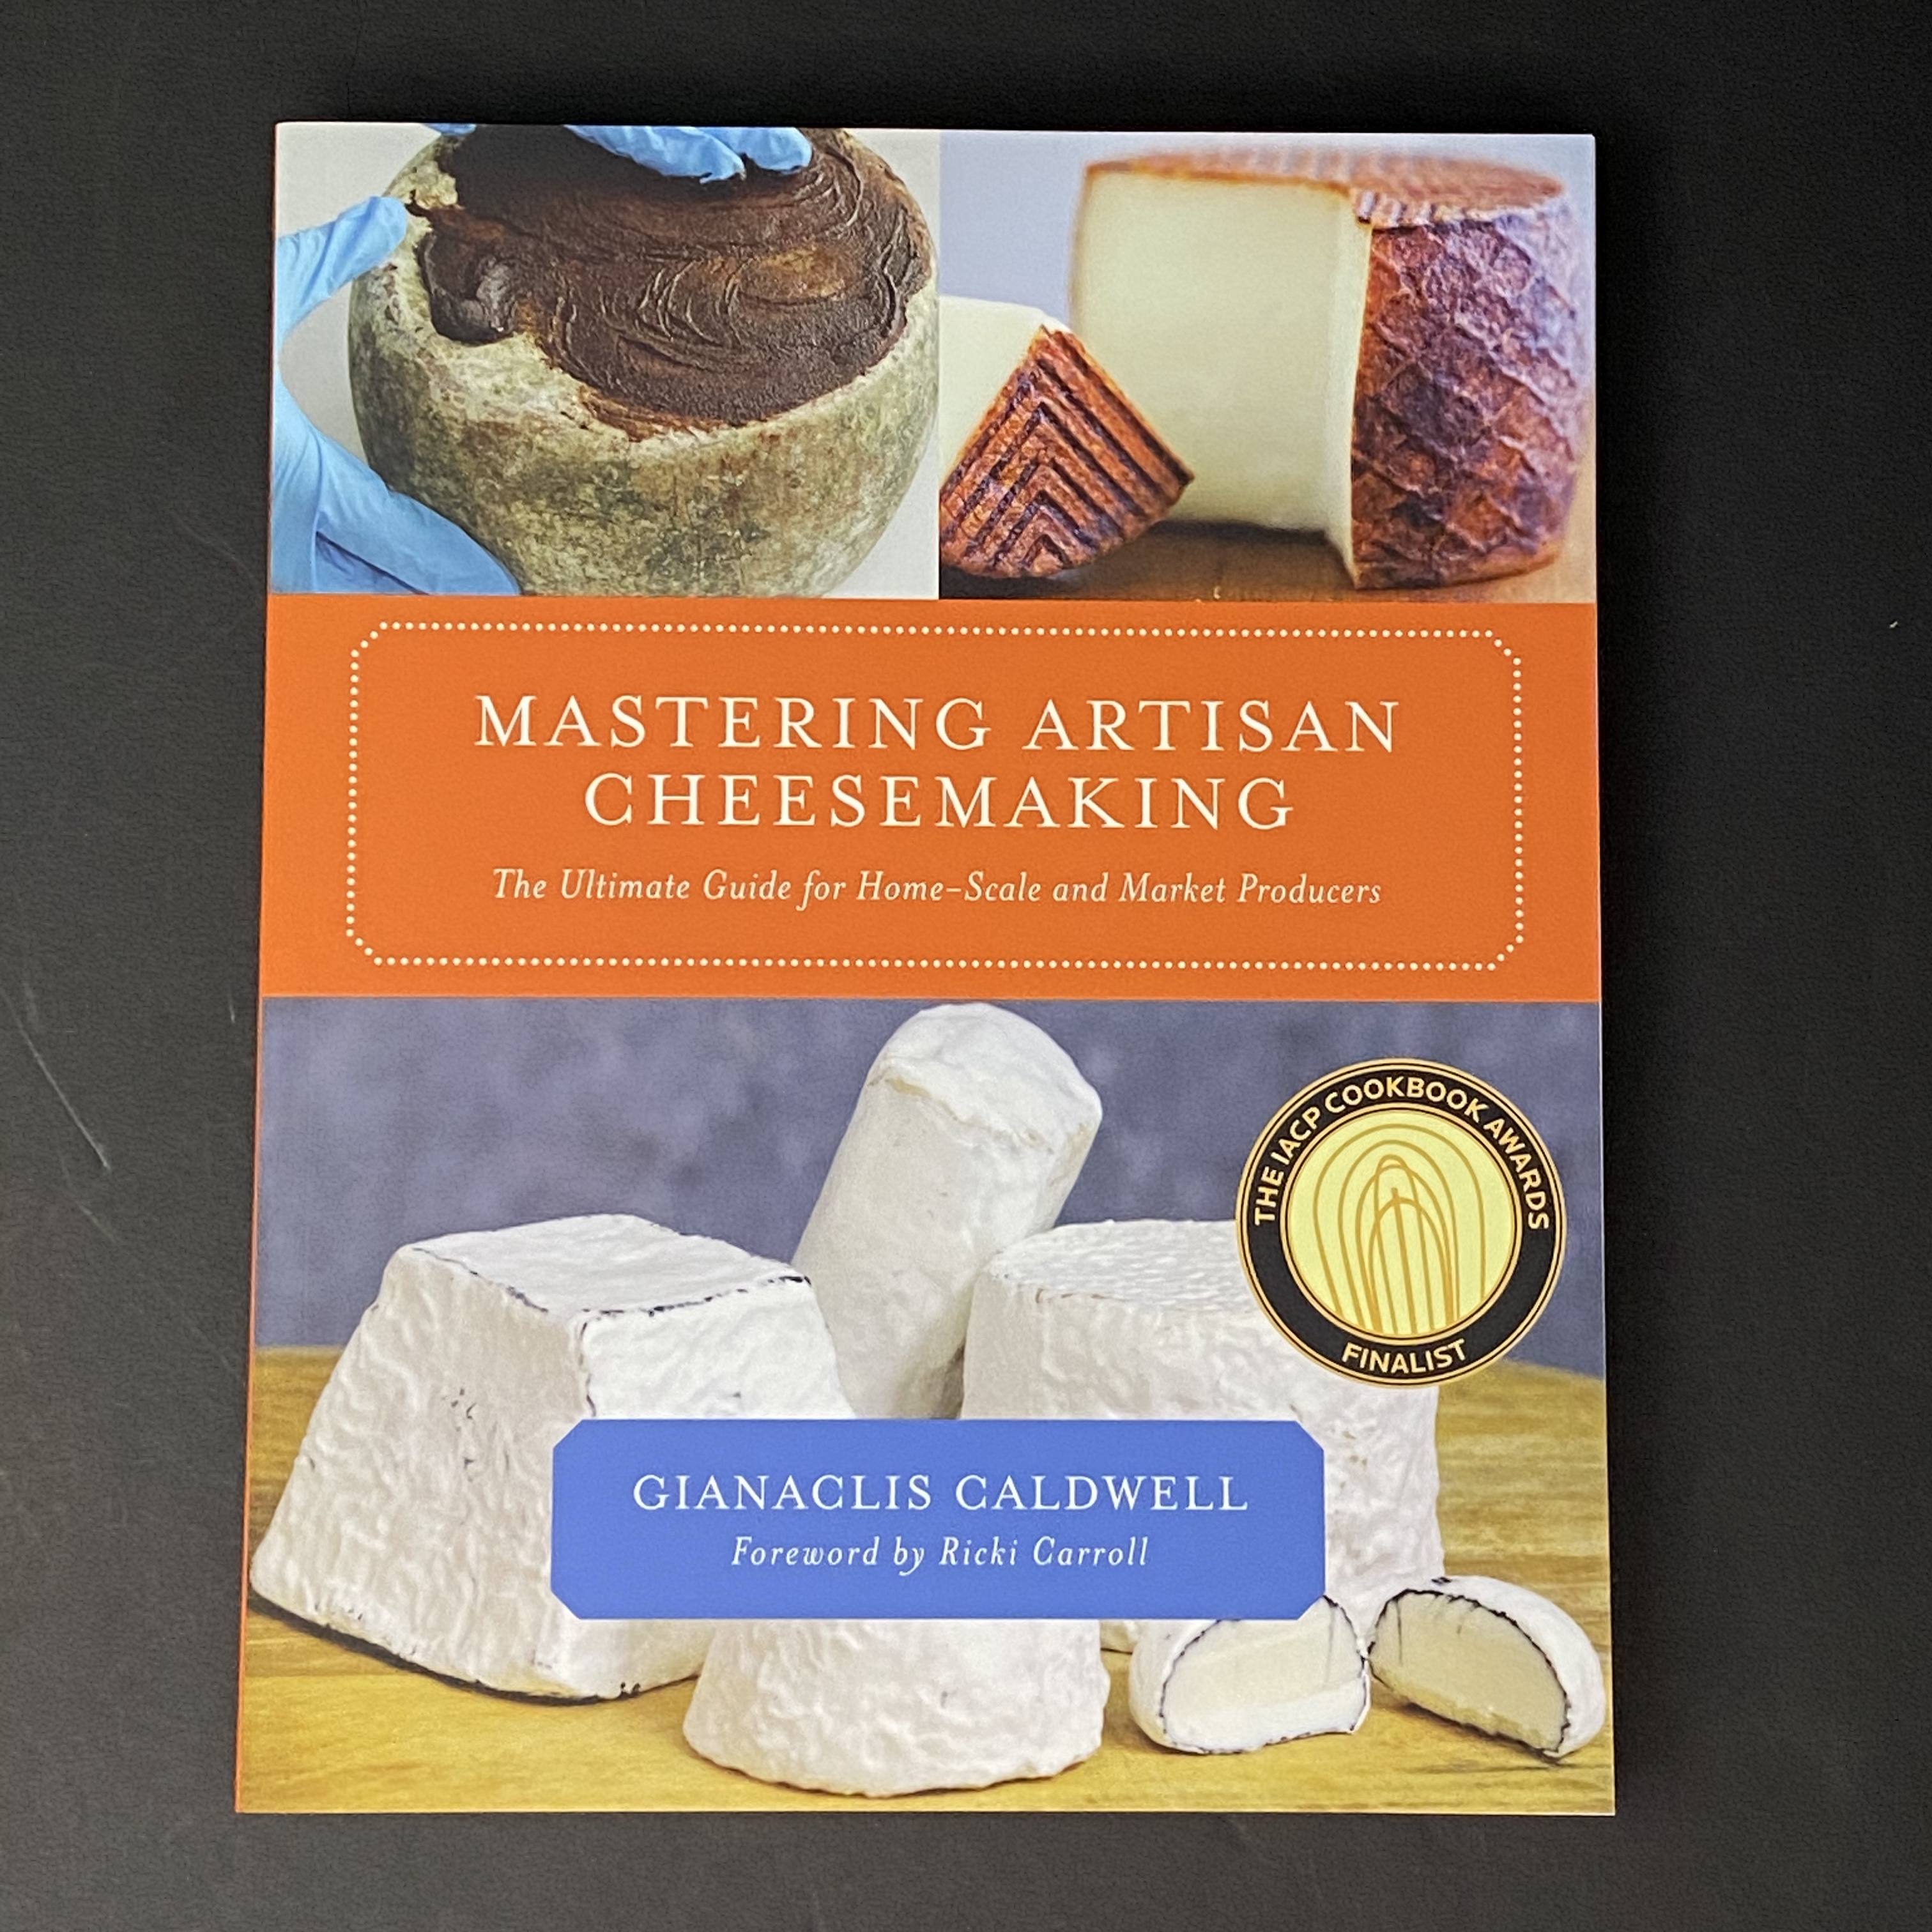 Mastering Artisan Cheesemaking: The Ultimate Guide for Home-Scale and Market Producers [Book]